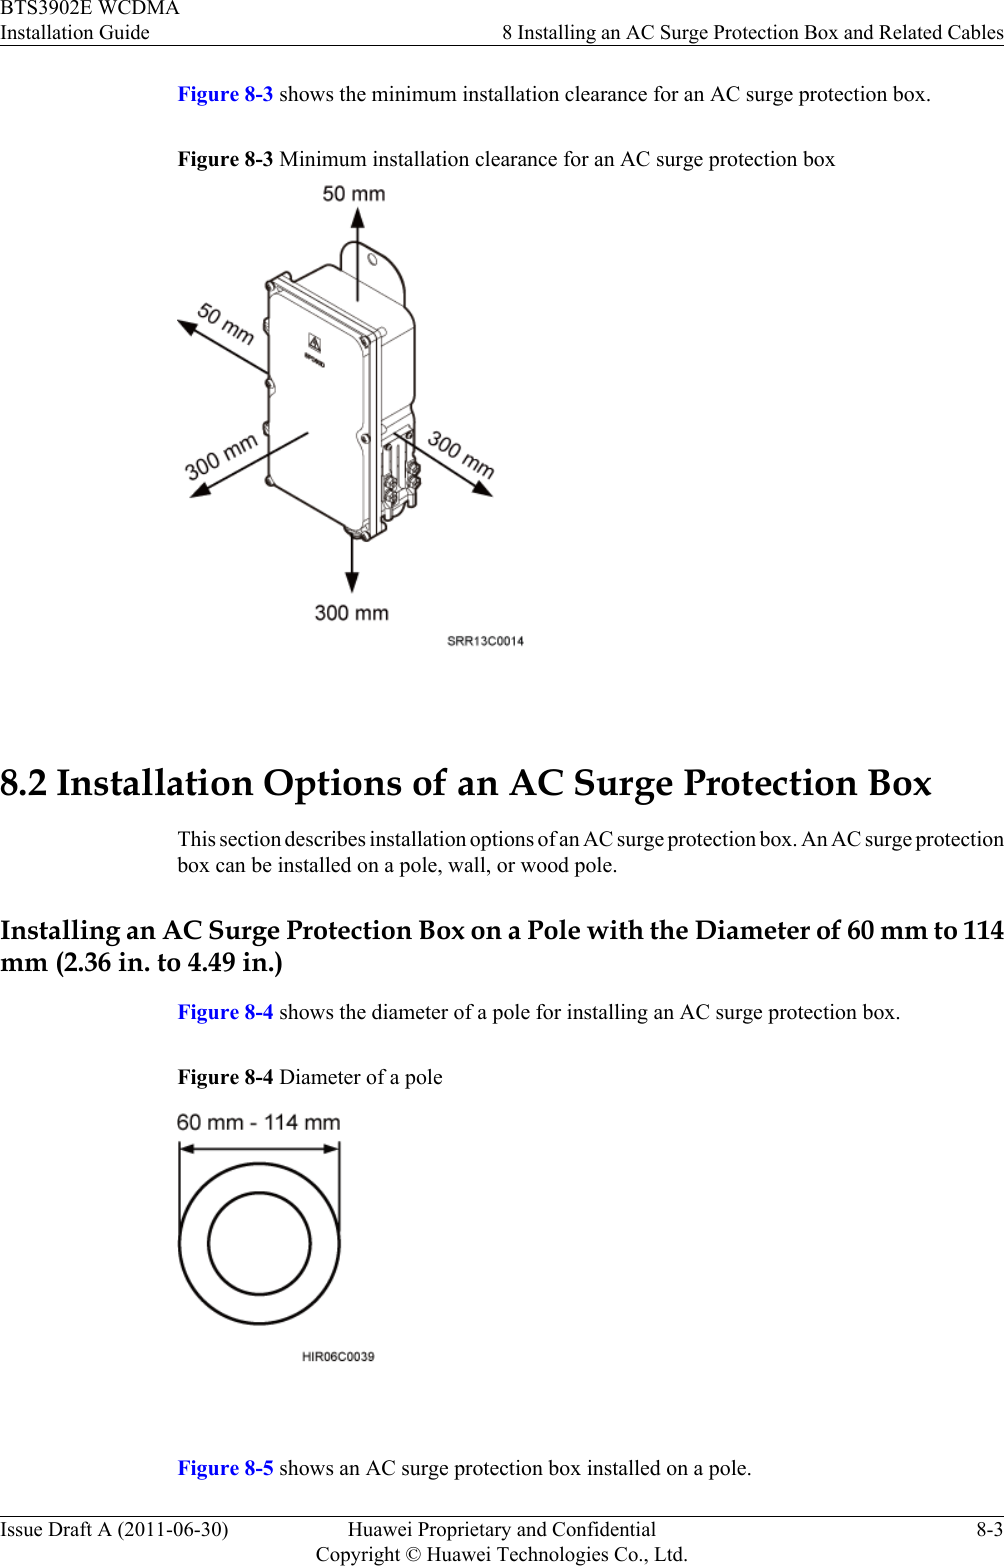 Figure 8-3 shows the minimum installation clearance for an AC surge protection box.Figure 8-3 Minimum installation clearance for an AC surge protection box 8.2 Installation Options of an AC Surge Protection BoxThis section describes installation options of an AC surge protection box. An AC surge protectionbox can be installed on a pole, wall, or wood pole.Installing an AC Surge Protection Box on a Pole with the Diameter of 60 mm to 114mm (2.36 in. to 4.49 in.)Figure 8-4 shows the diameter of a pole for installing an AC surge protection box.Figure 8-4 Diameter of a pole Figure 8-5 shows an AC surge protection box installed on a pole.BTS3902E WCDMAInstallation Guide 8 Installing an AC Surge Protection Box and Related CablesIssue Draft A (2011-06-30) Huawei Proprietary and ConfidentialCopyright © Huawei Technologies Co., Ltd.8-3